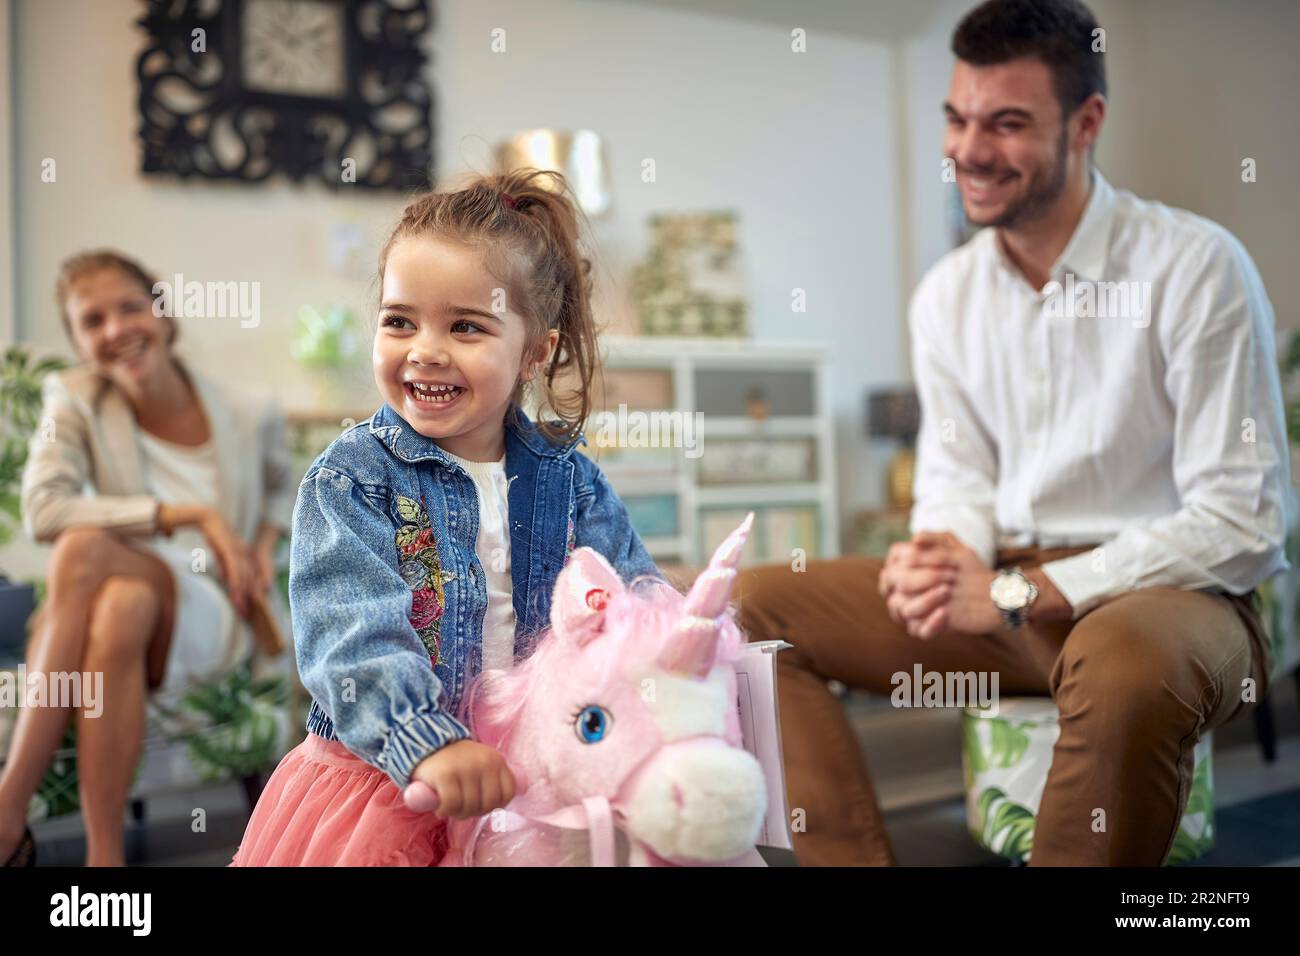 Cute toddler girl riding a pink unicorn rocking horse in a furniture shop, lovely family in a home decor shop together. Shopping, lifestyle, family co Stock Photo